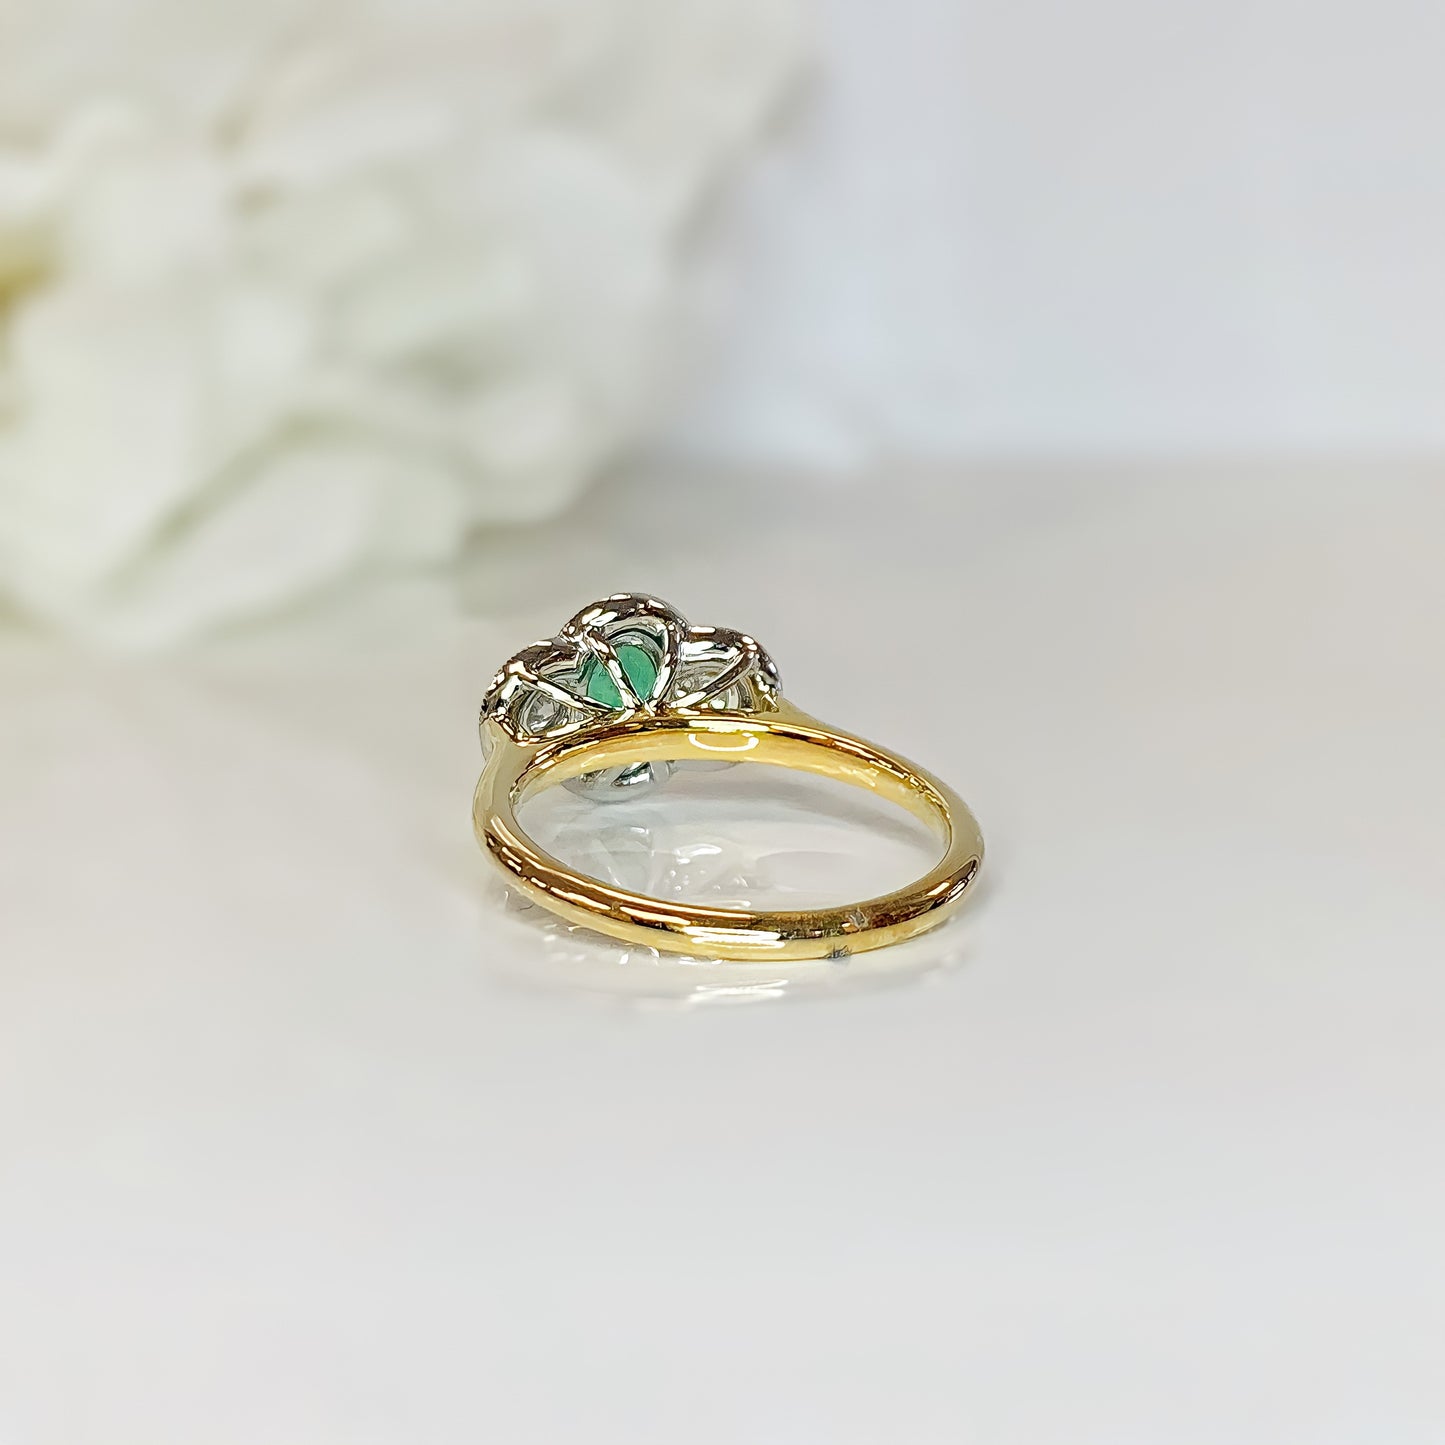 18ct Yellow Gold Art Deco Inspired Emerald And Diamond Ring - SIZE N